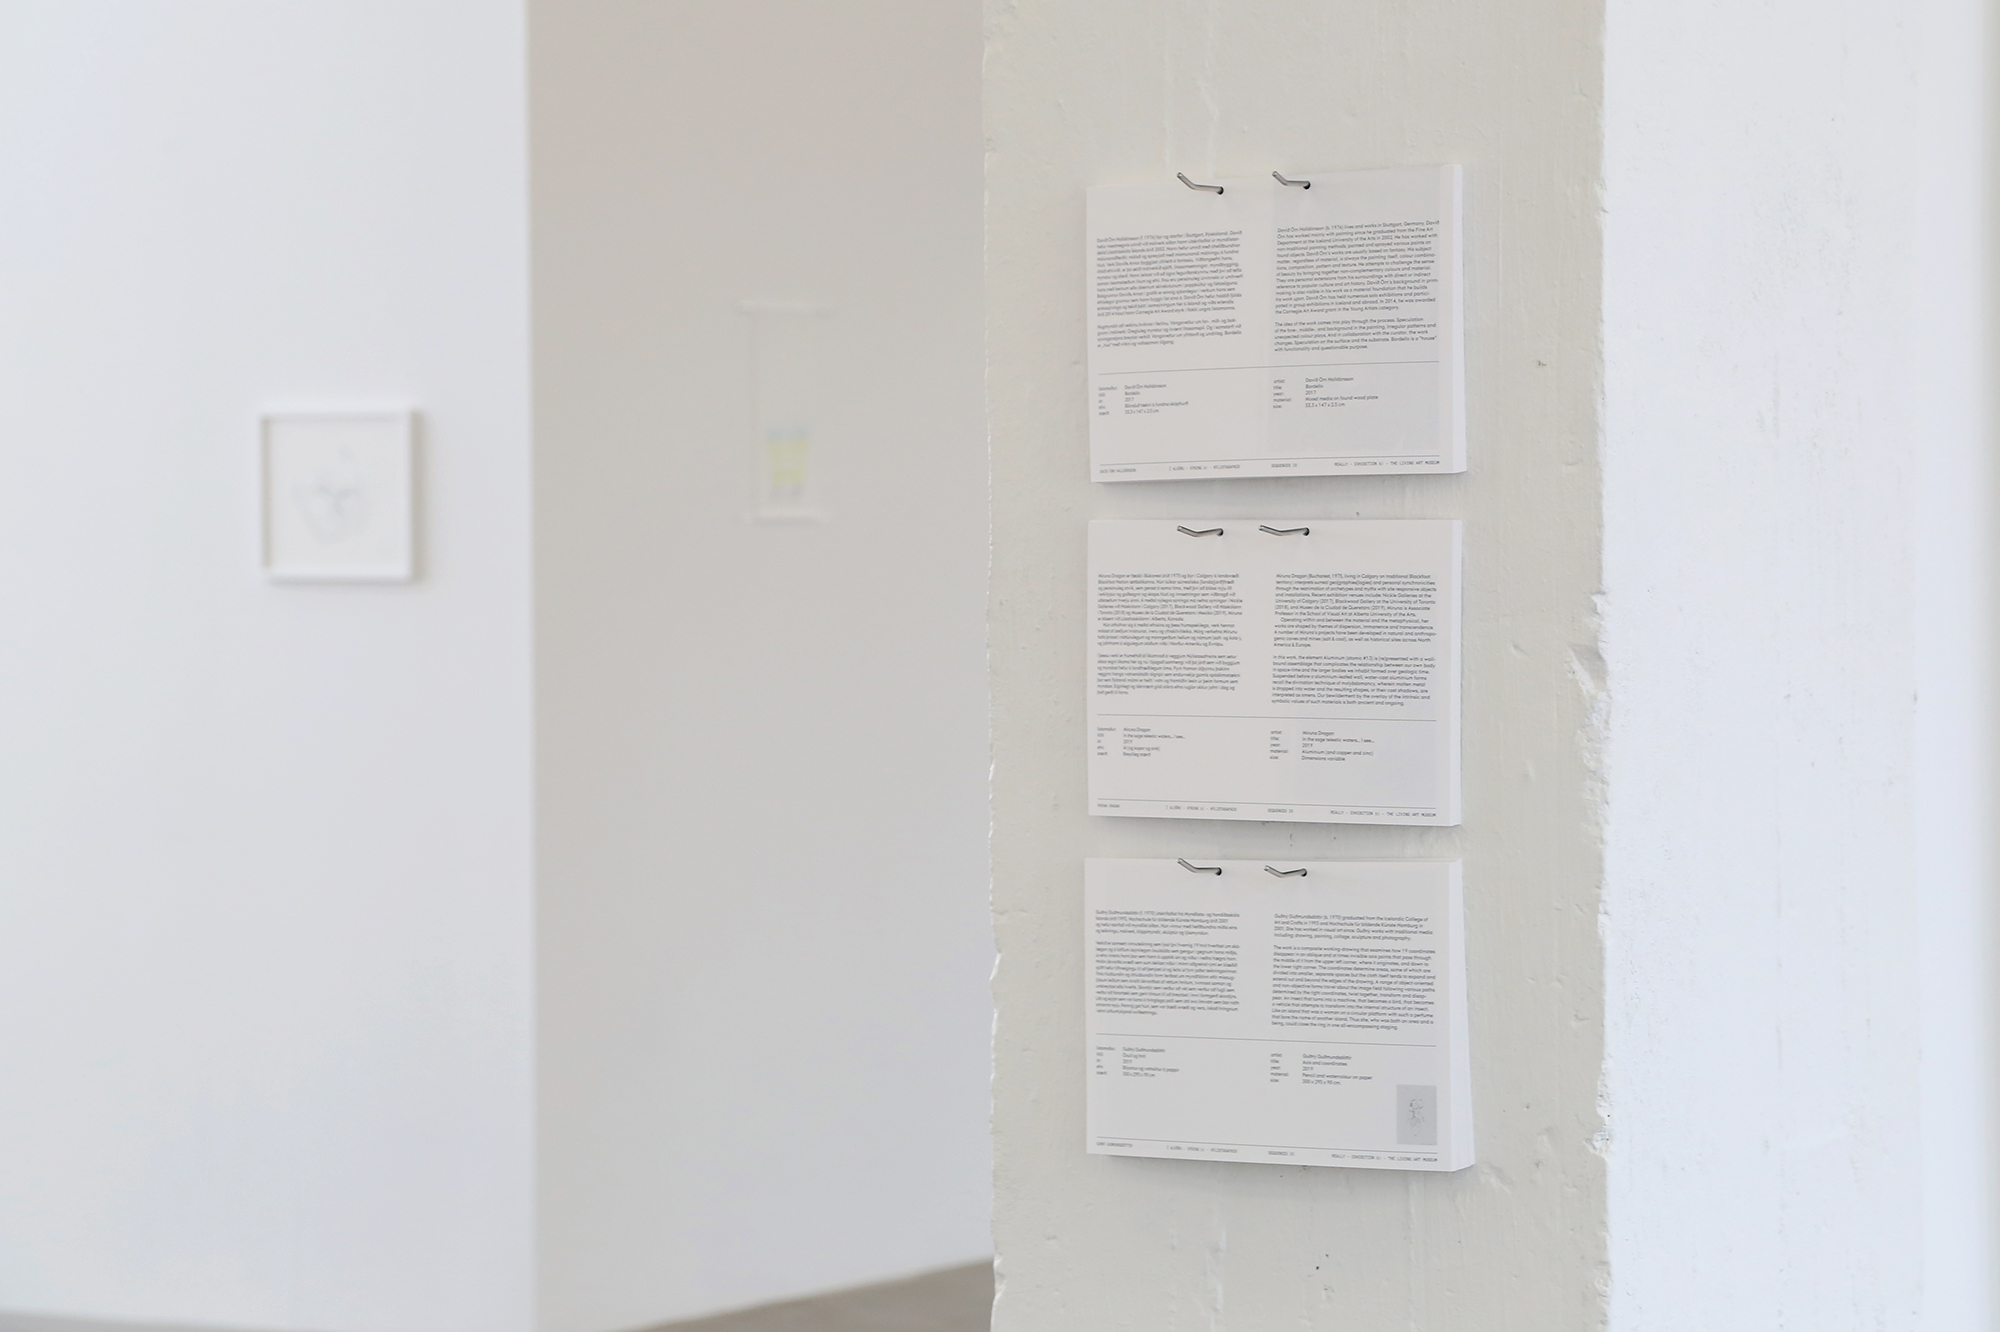 Three stacks of object labels hang on a white column in a gallery.